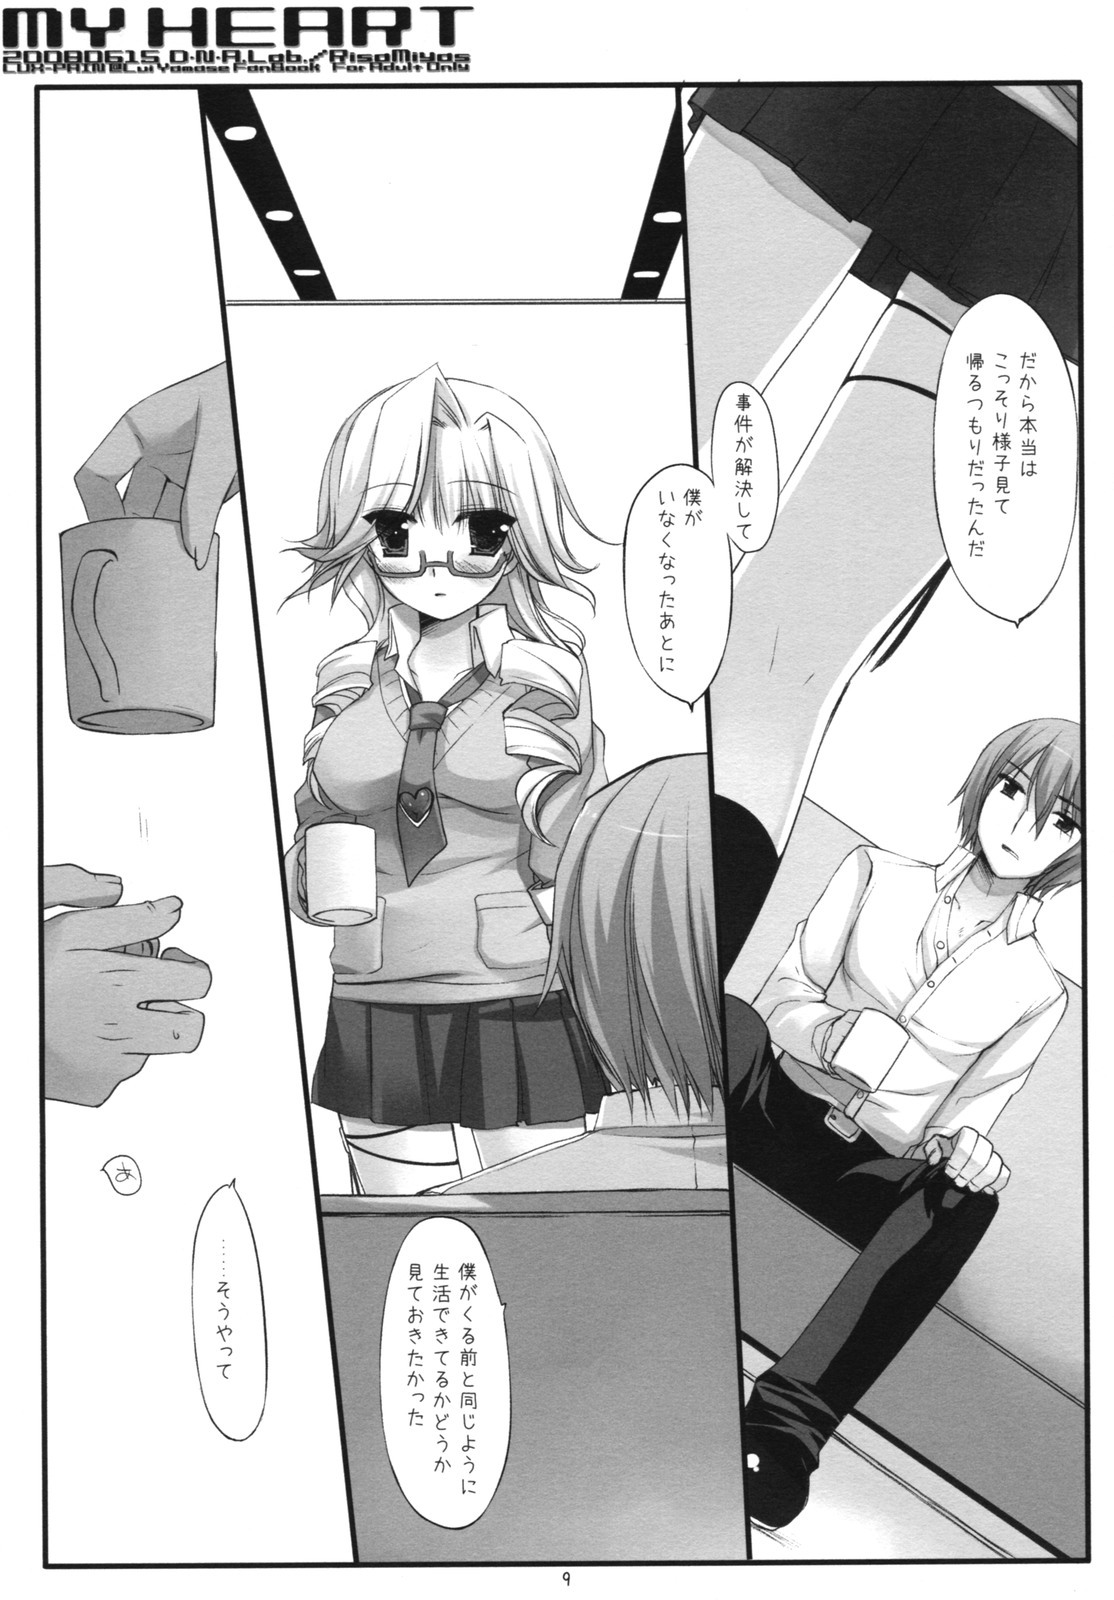 (SC40) [D.N.A.Lab. (Miyasu Risa)] MY HEART (LUX-PAIN) page 8 full